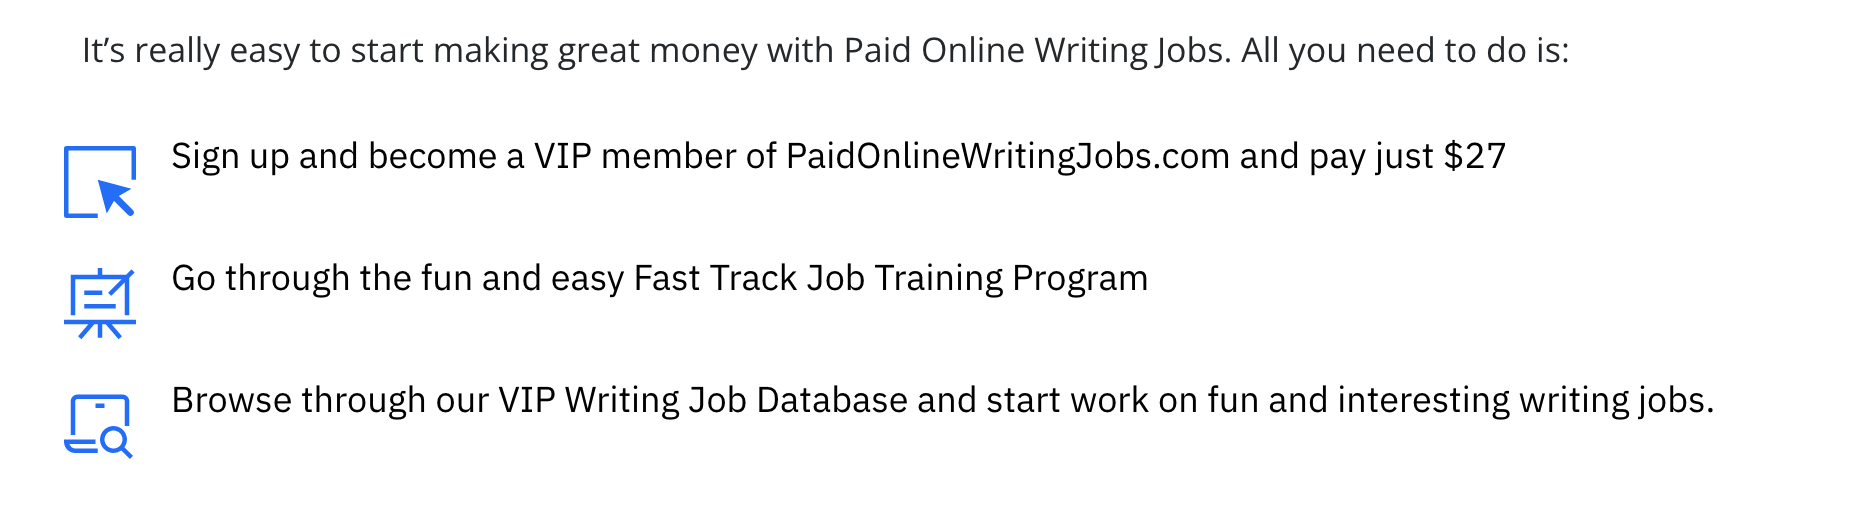 Paid Online Writing Jobs Review 